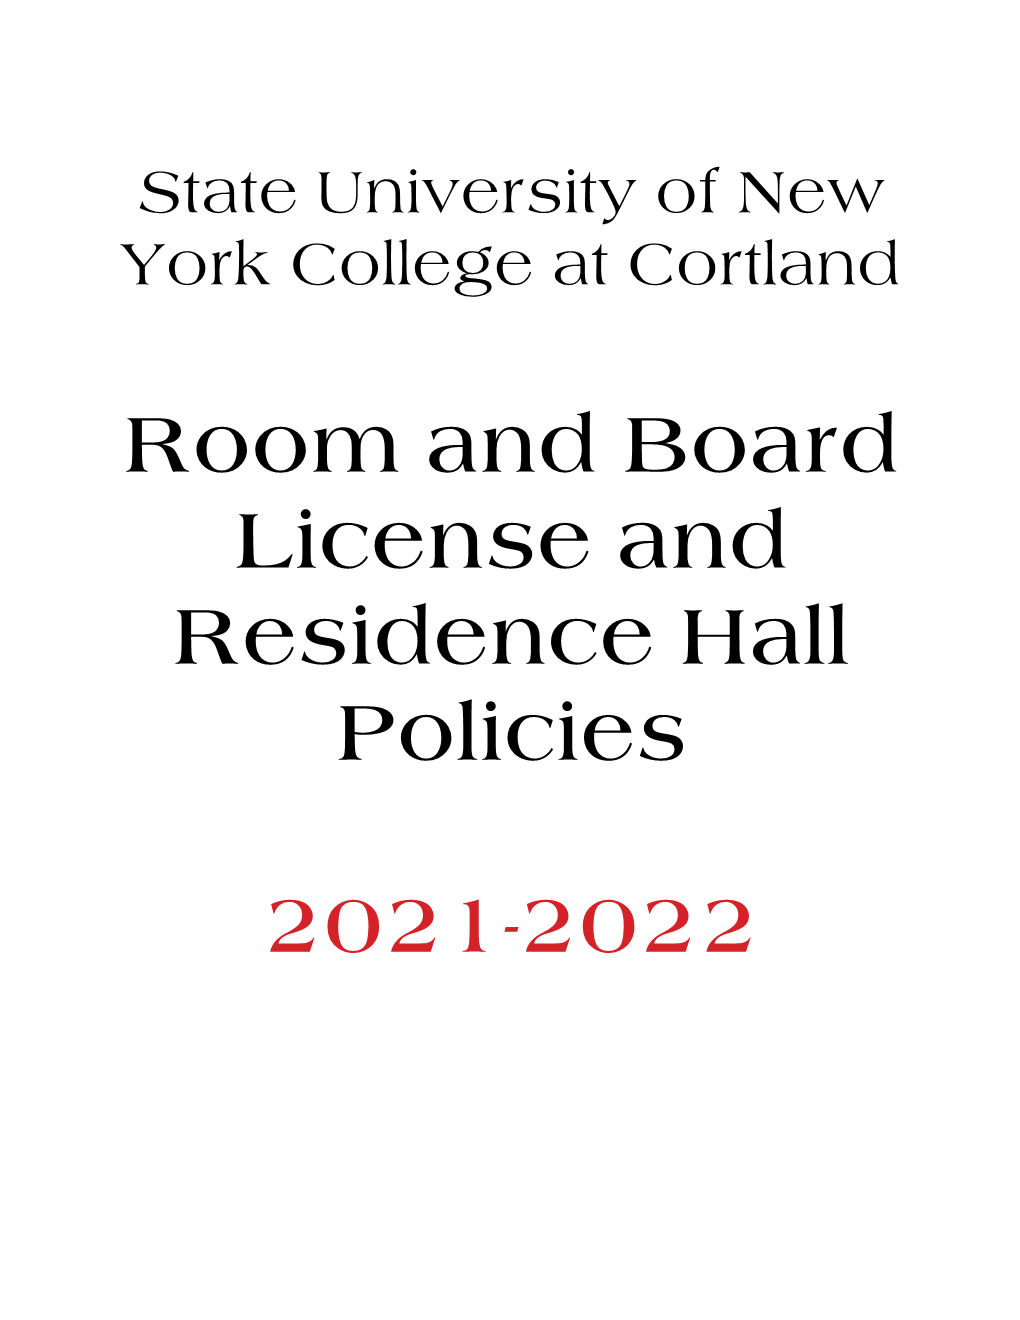 Room and Board License and Residence Hall Policies 2021-2022